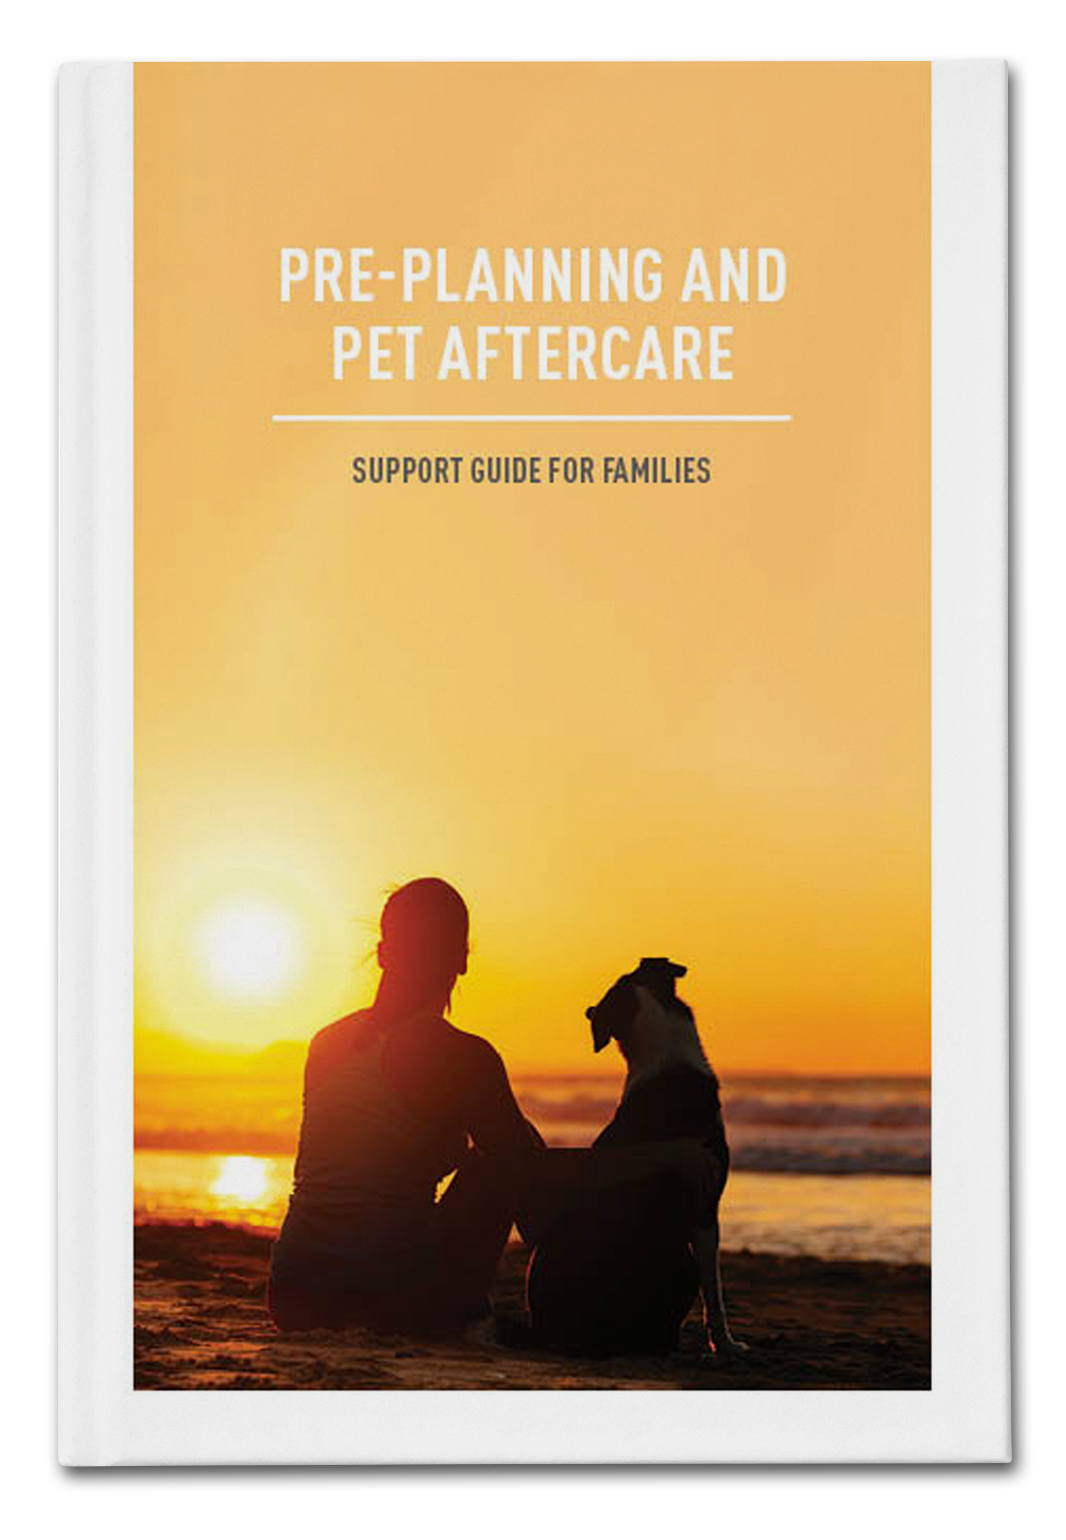 Grief Support Resource Book - Preplanning and Pet Aftercare - Link to Readable PDF